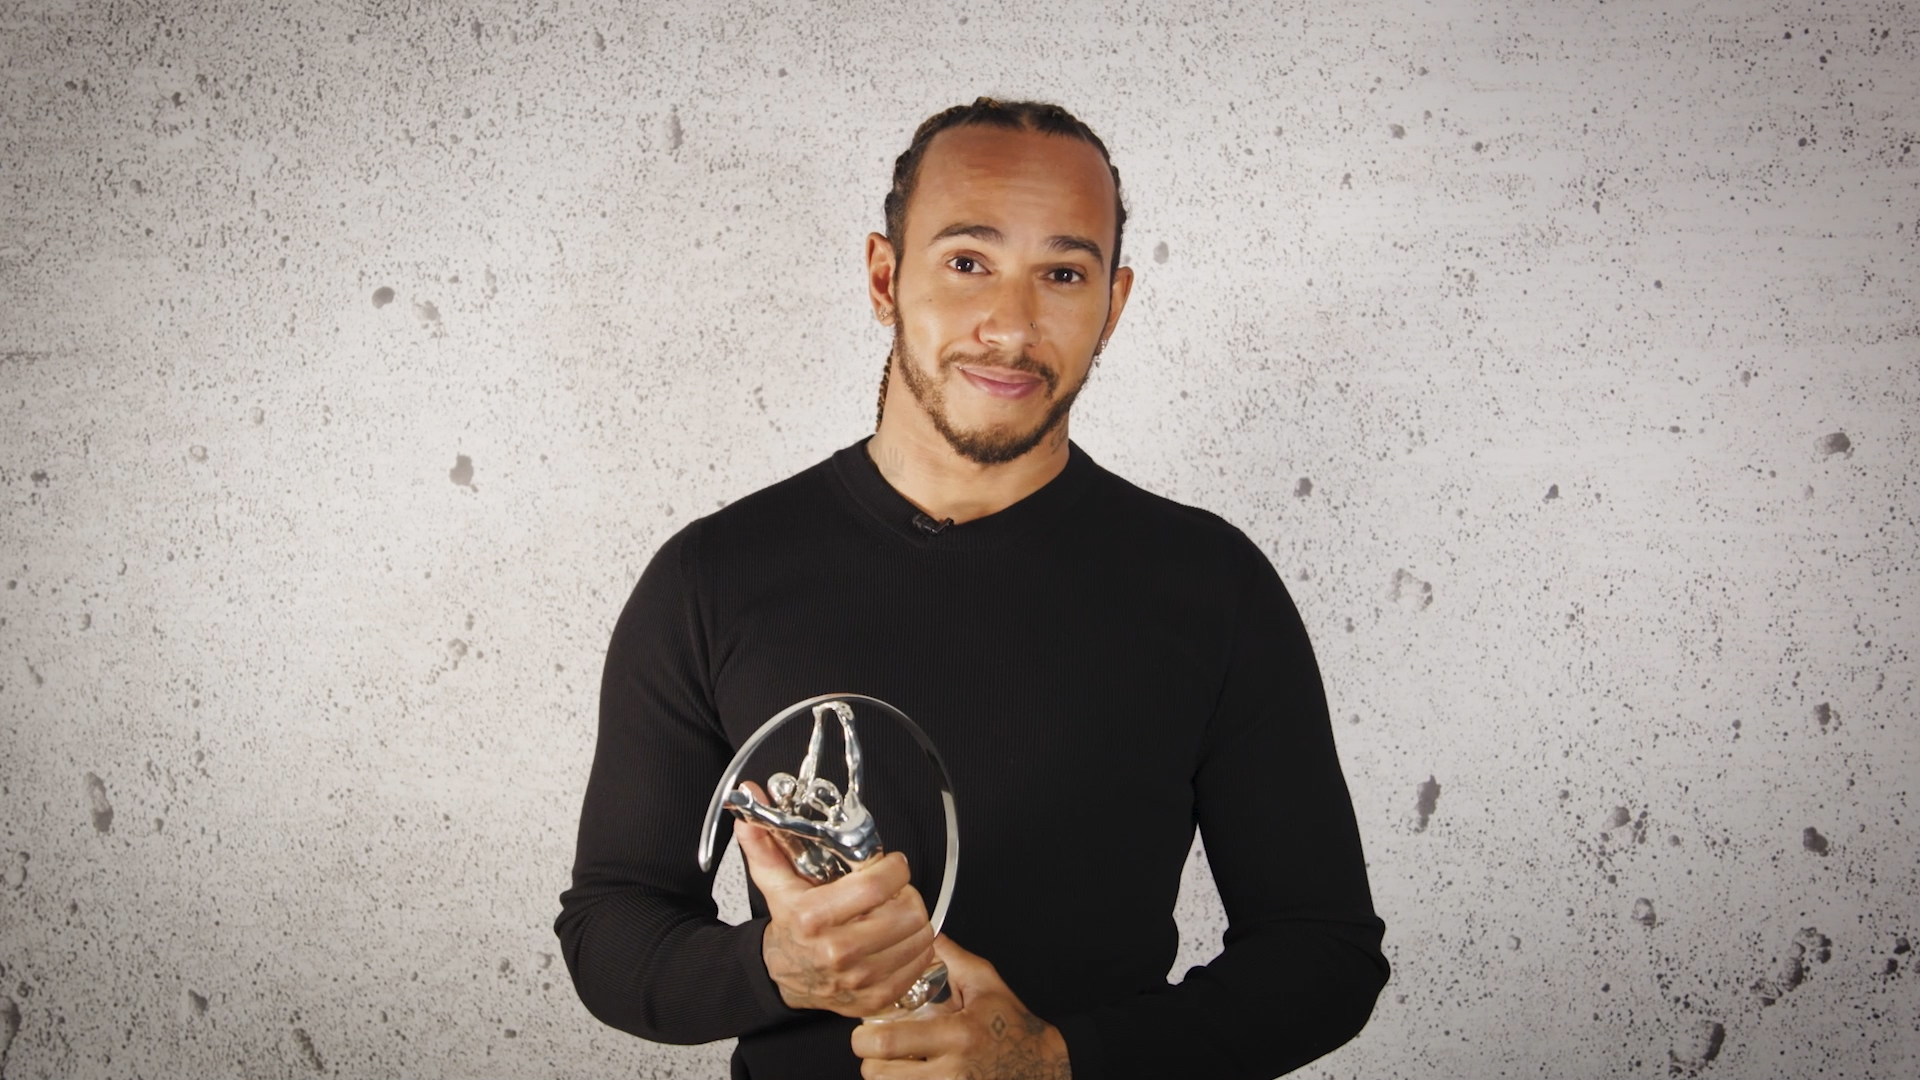 Hamilton adds another feather to his cap with Laureus Award